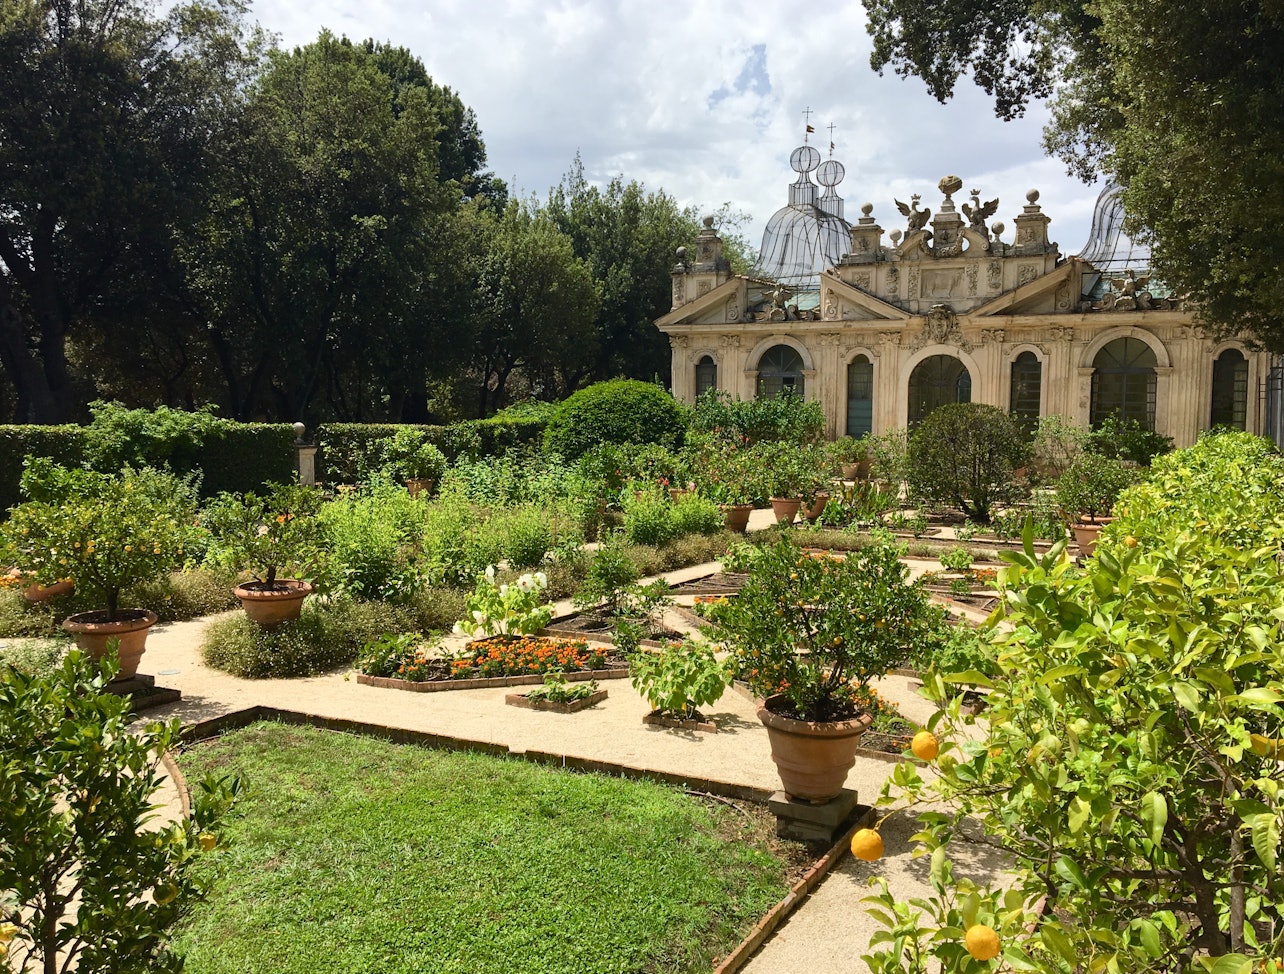 Villa Borghese Gardens and Historic Center by Golf Cart - Accommodations in Rome